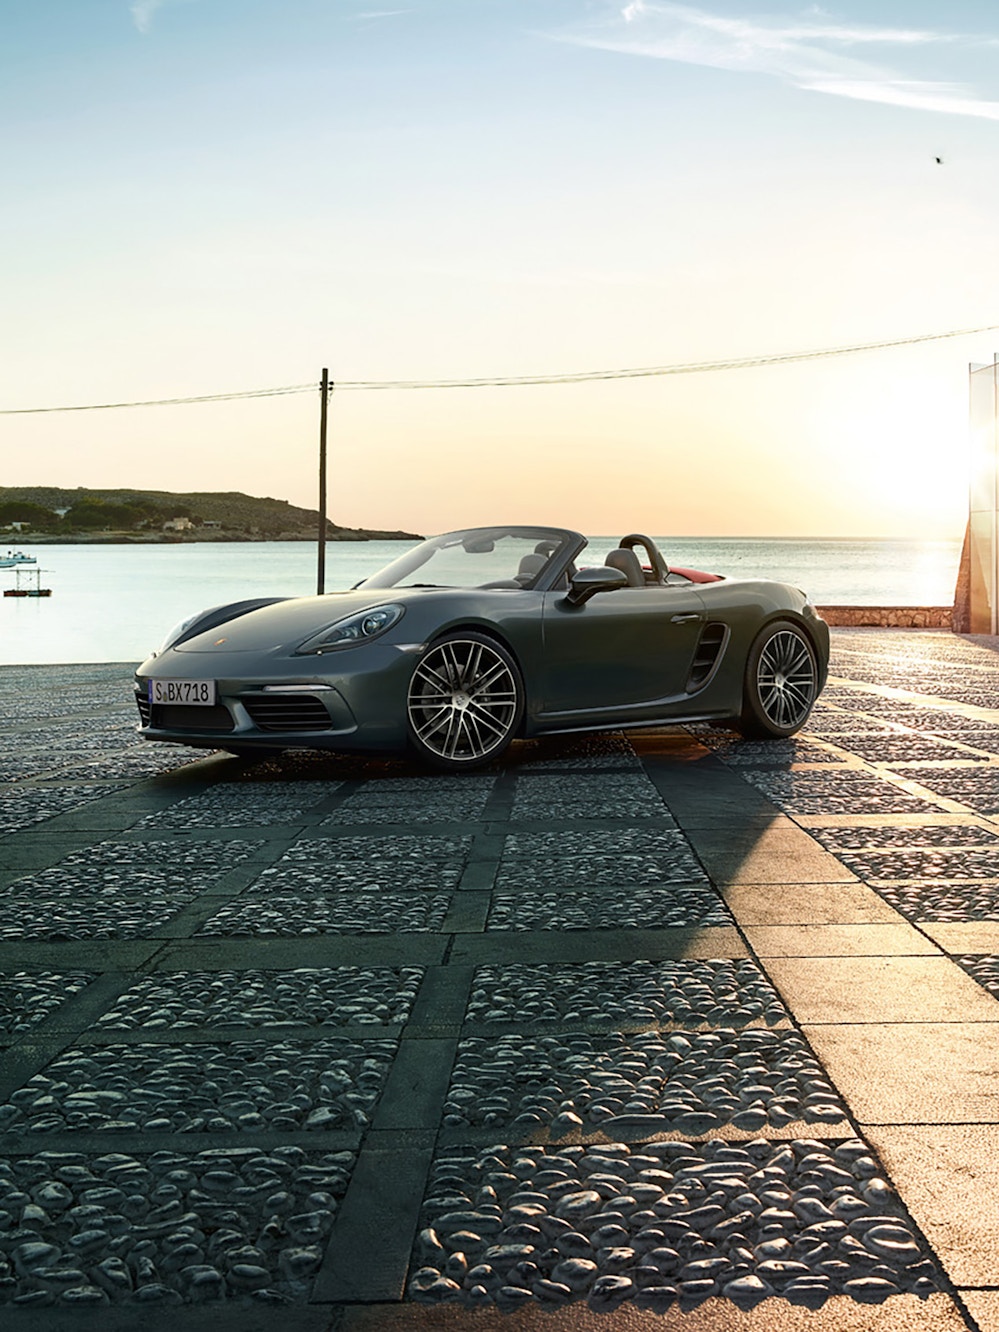 A grey metallic Porsche 718 Boxster vehicle parked outside with a sea view in the background.